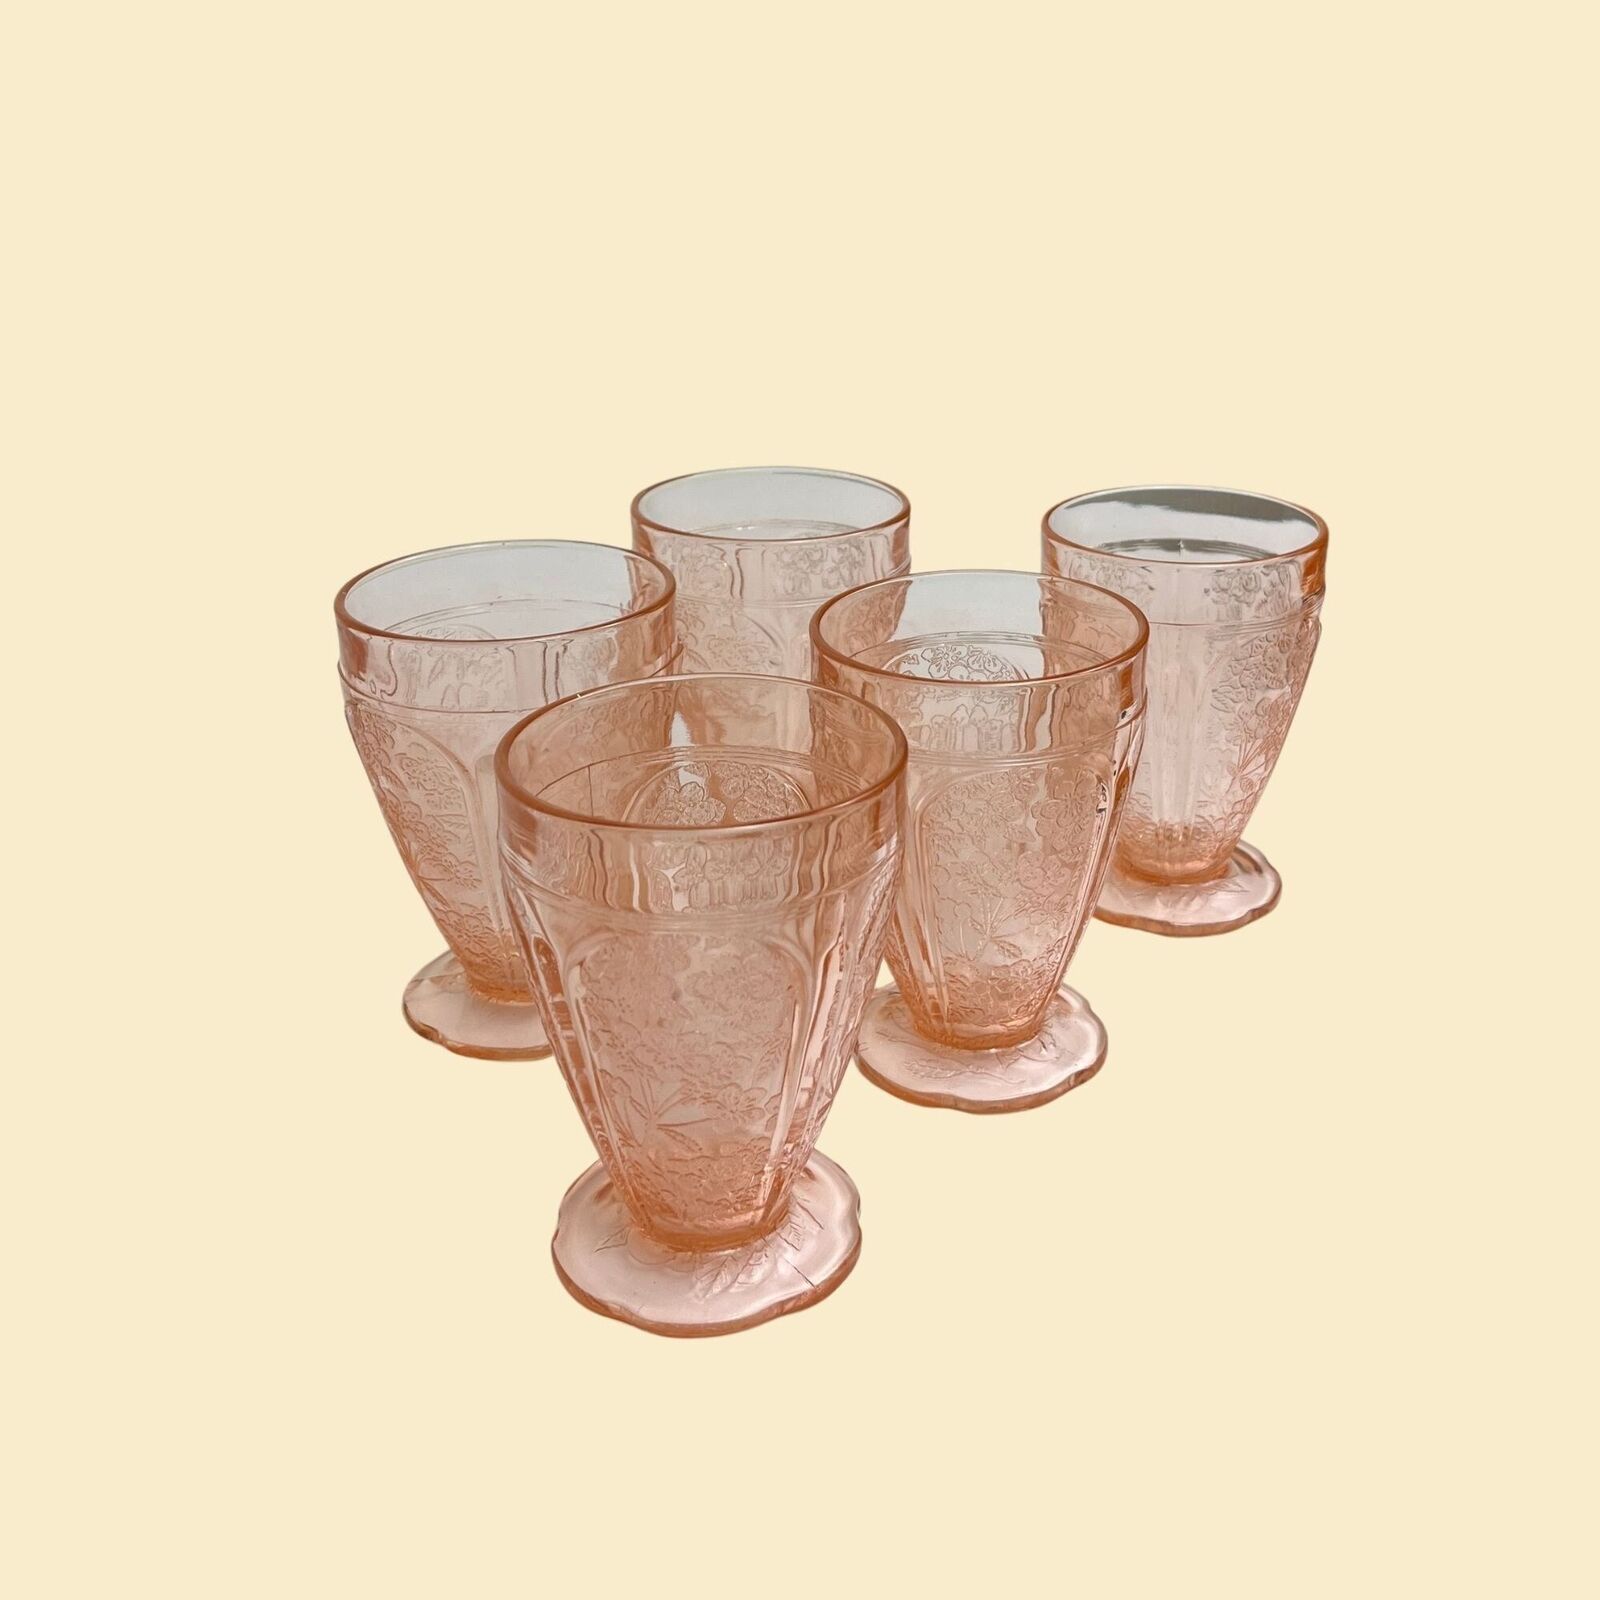 1930s pink depression glass cups, set of 5 Jeannette Glass Cherry Blossom cups